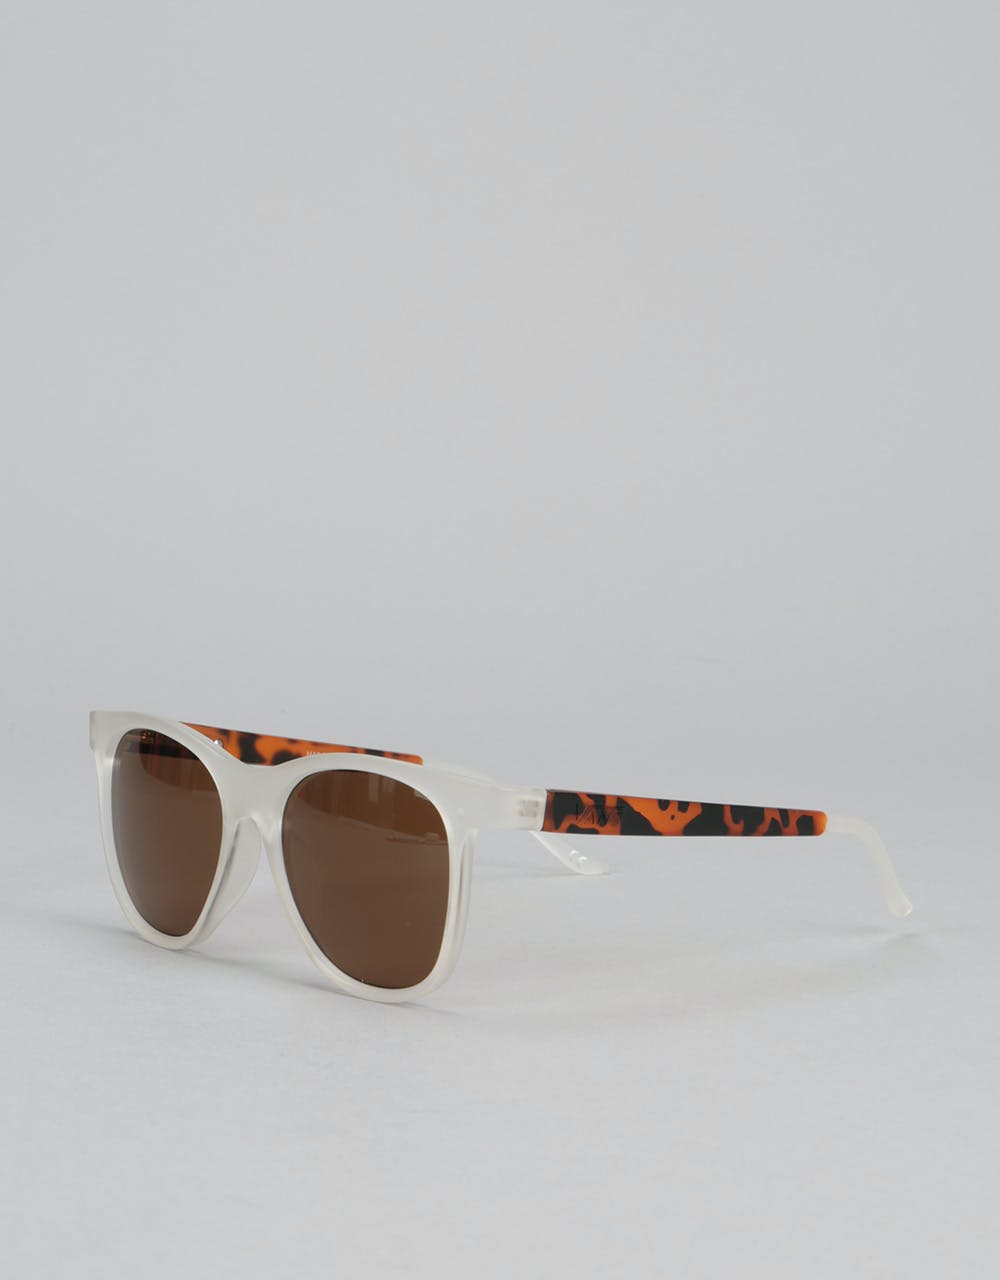 Vans Elsby Sunglasses - Frosted